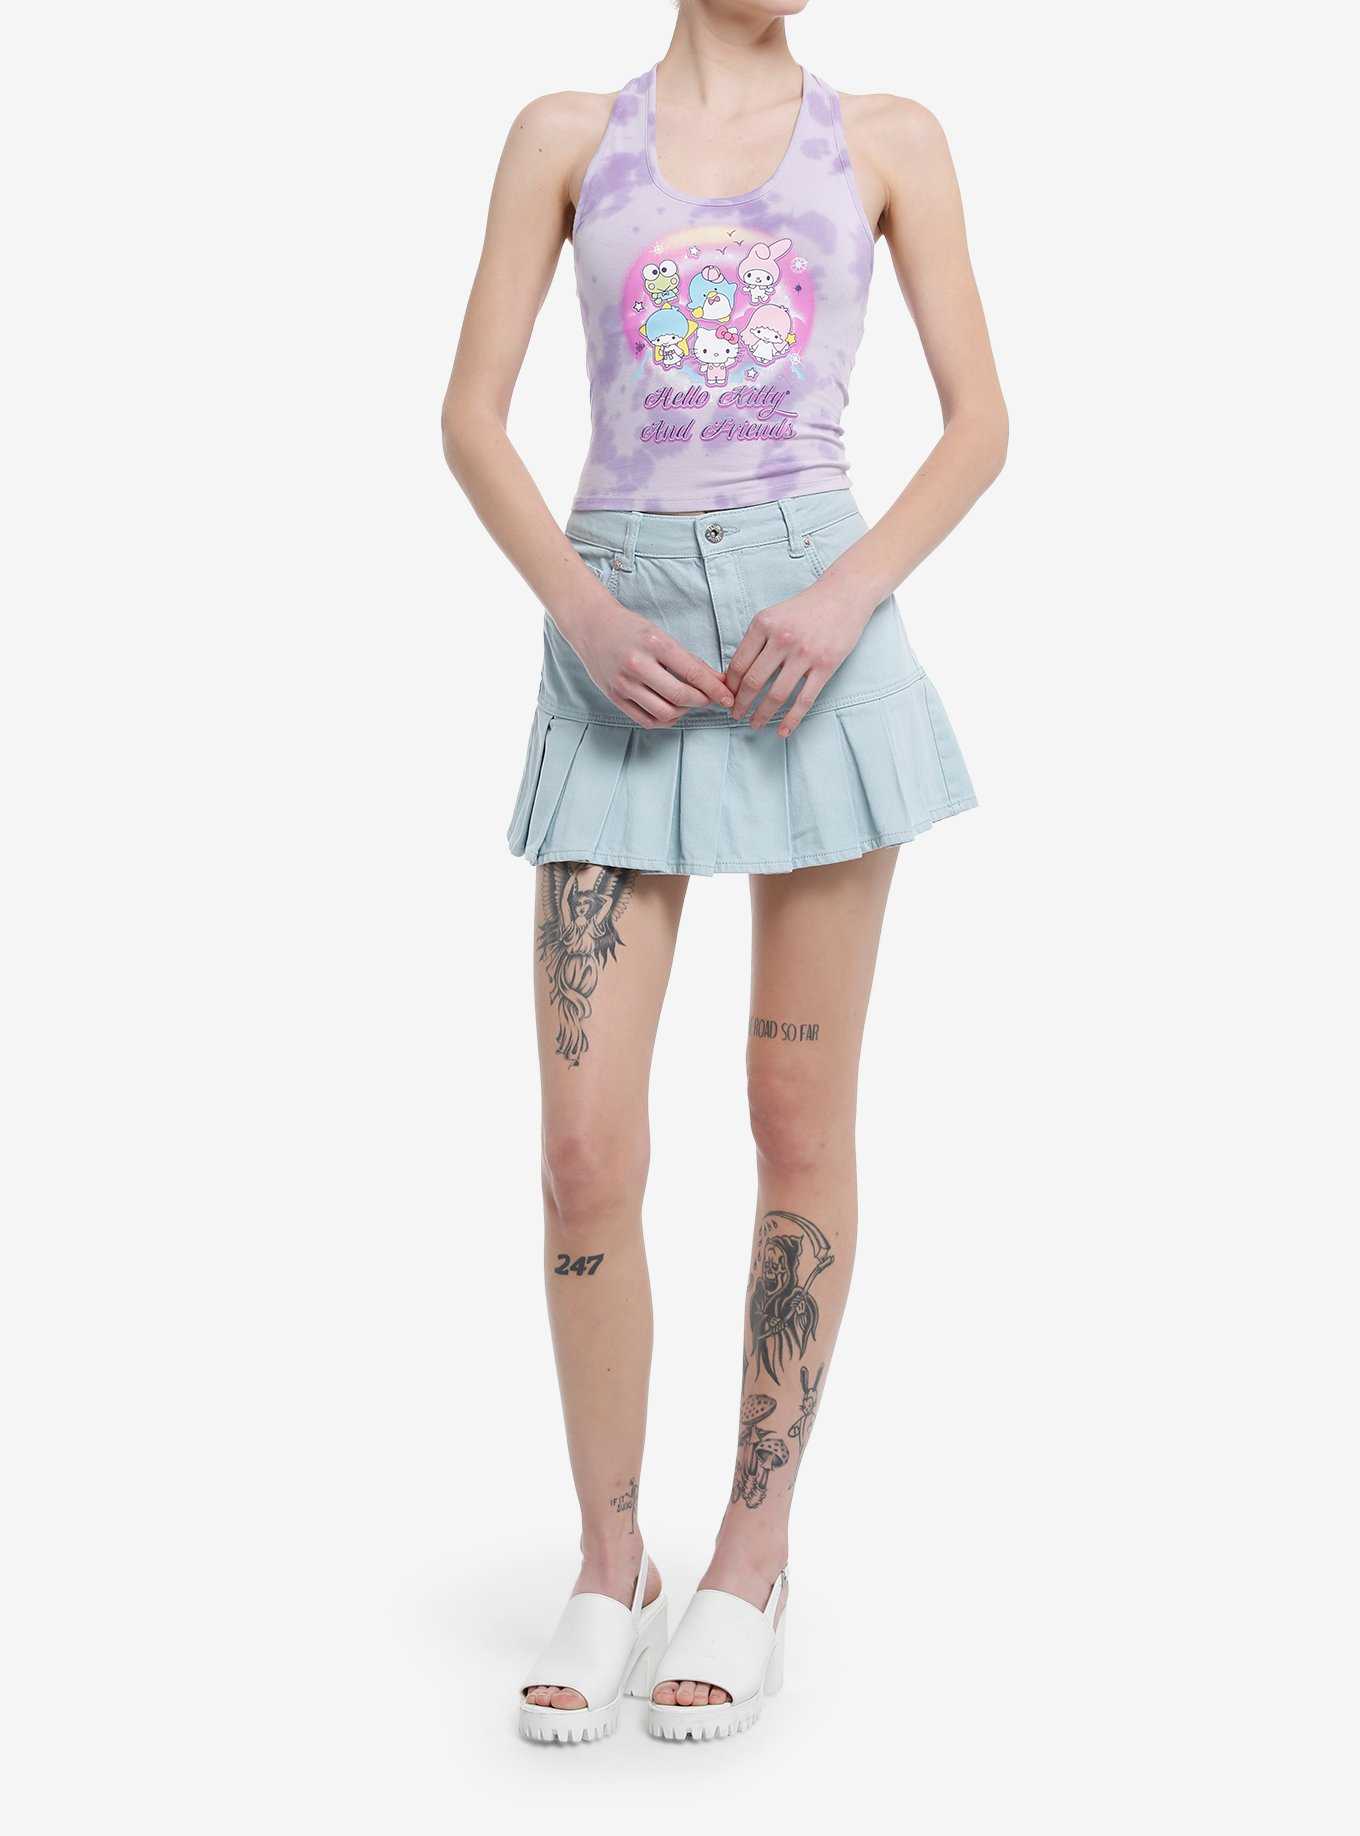 Hello Kitty And Friends Group Tie-Dye Girls Halter Top, , hi-res